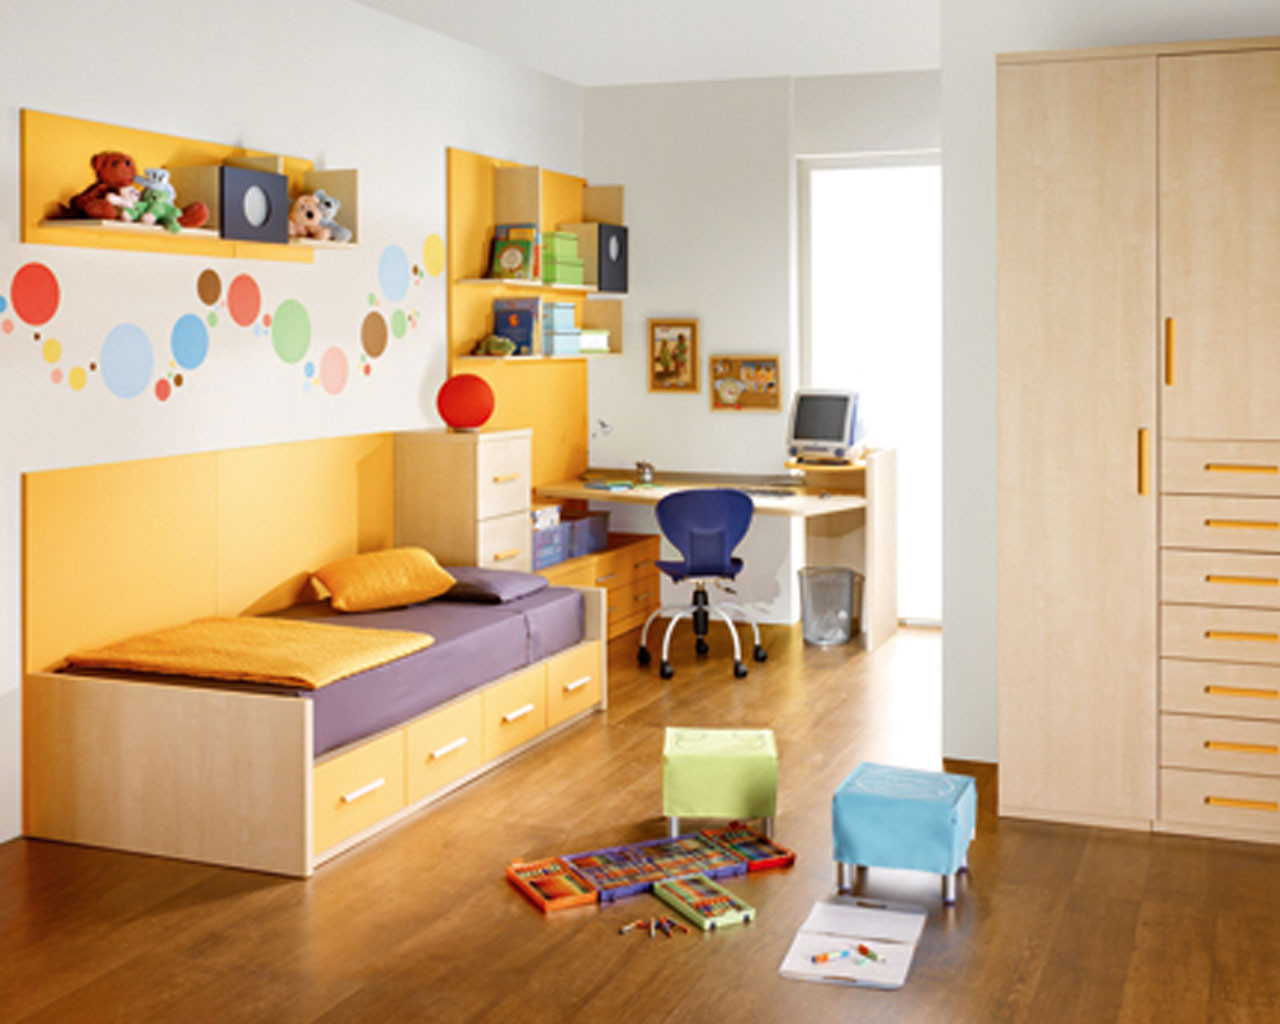 Kids Room Ideas
 Kids Room Decor and Design Ideas as the Easy yet Effective